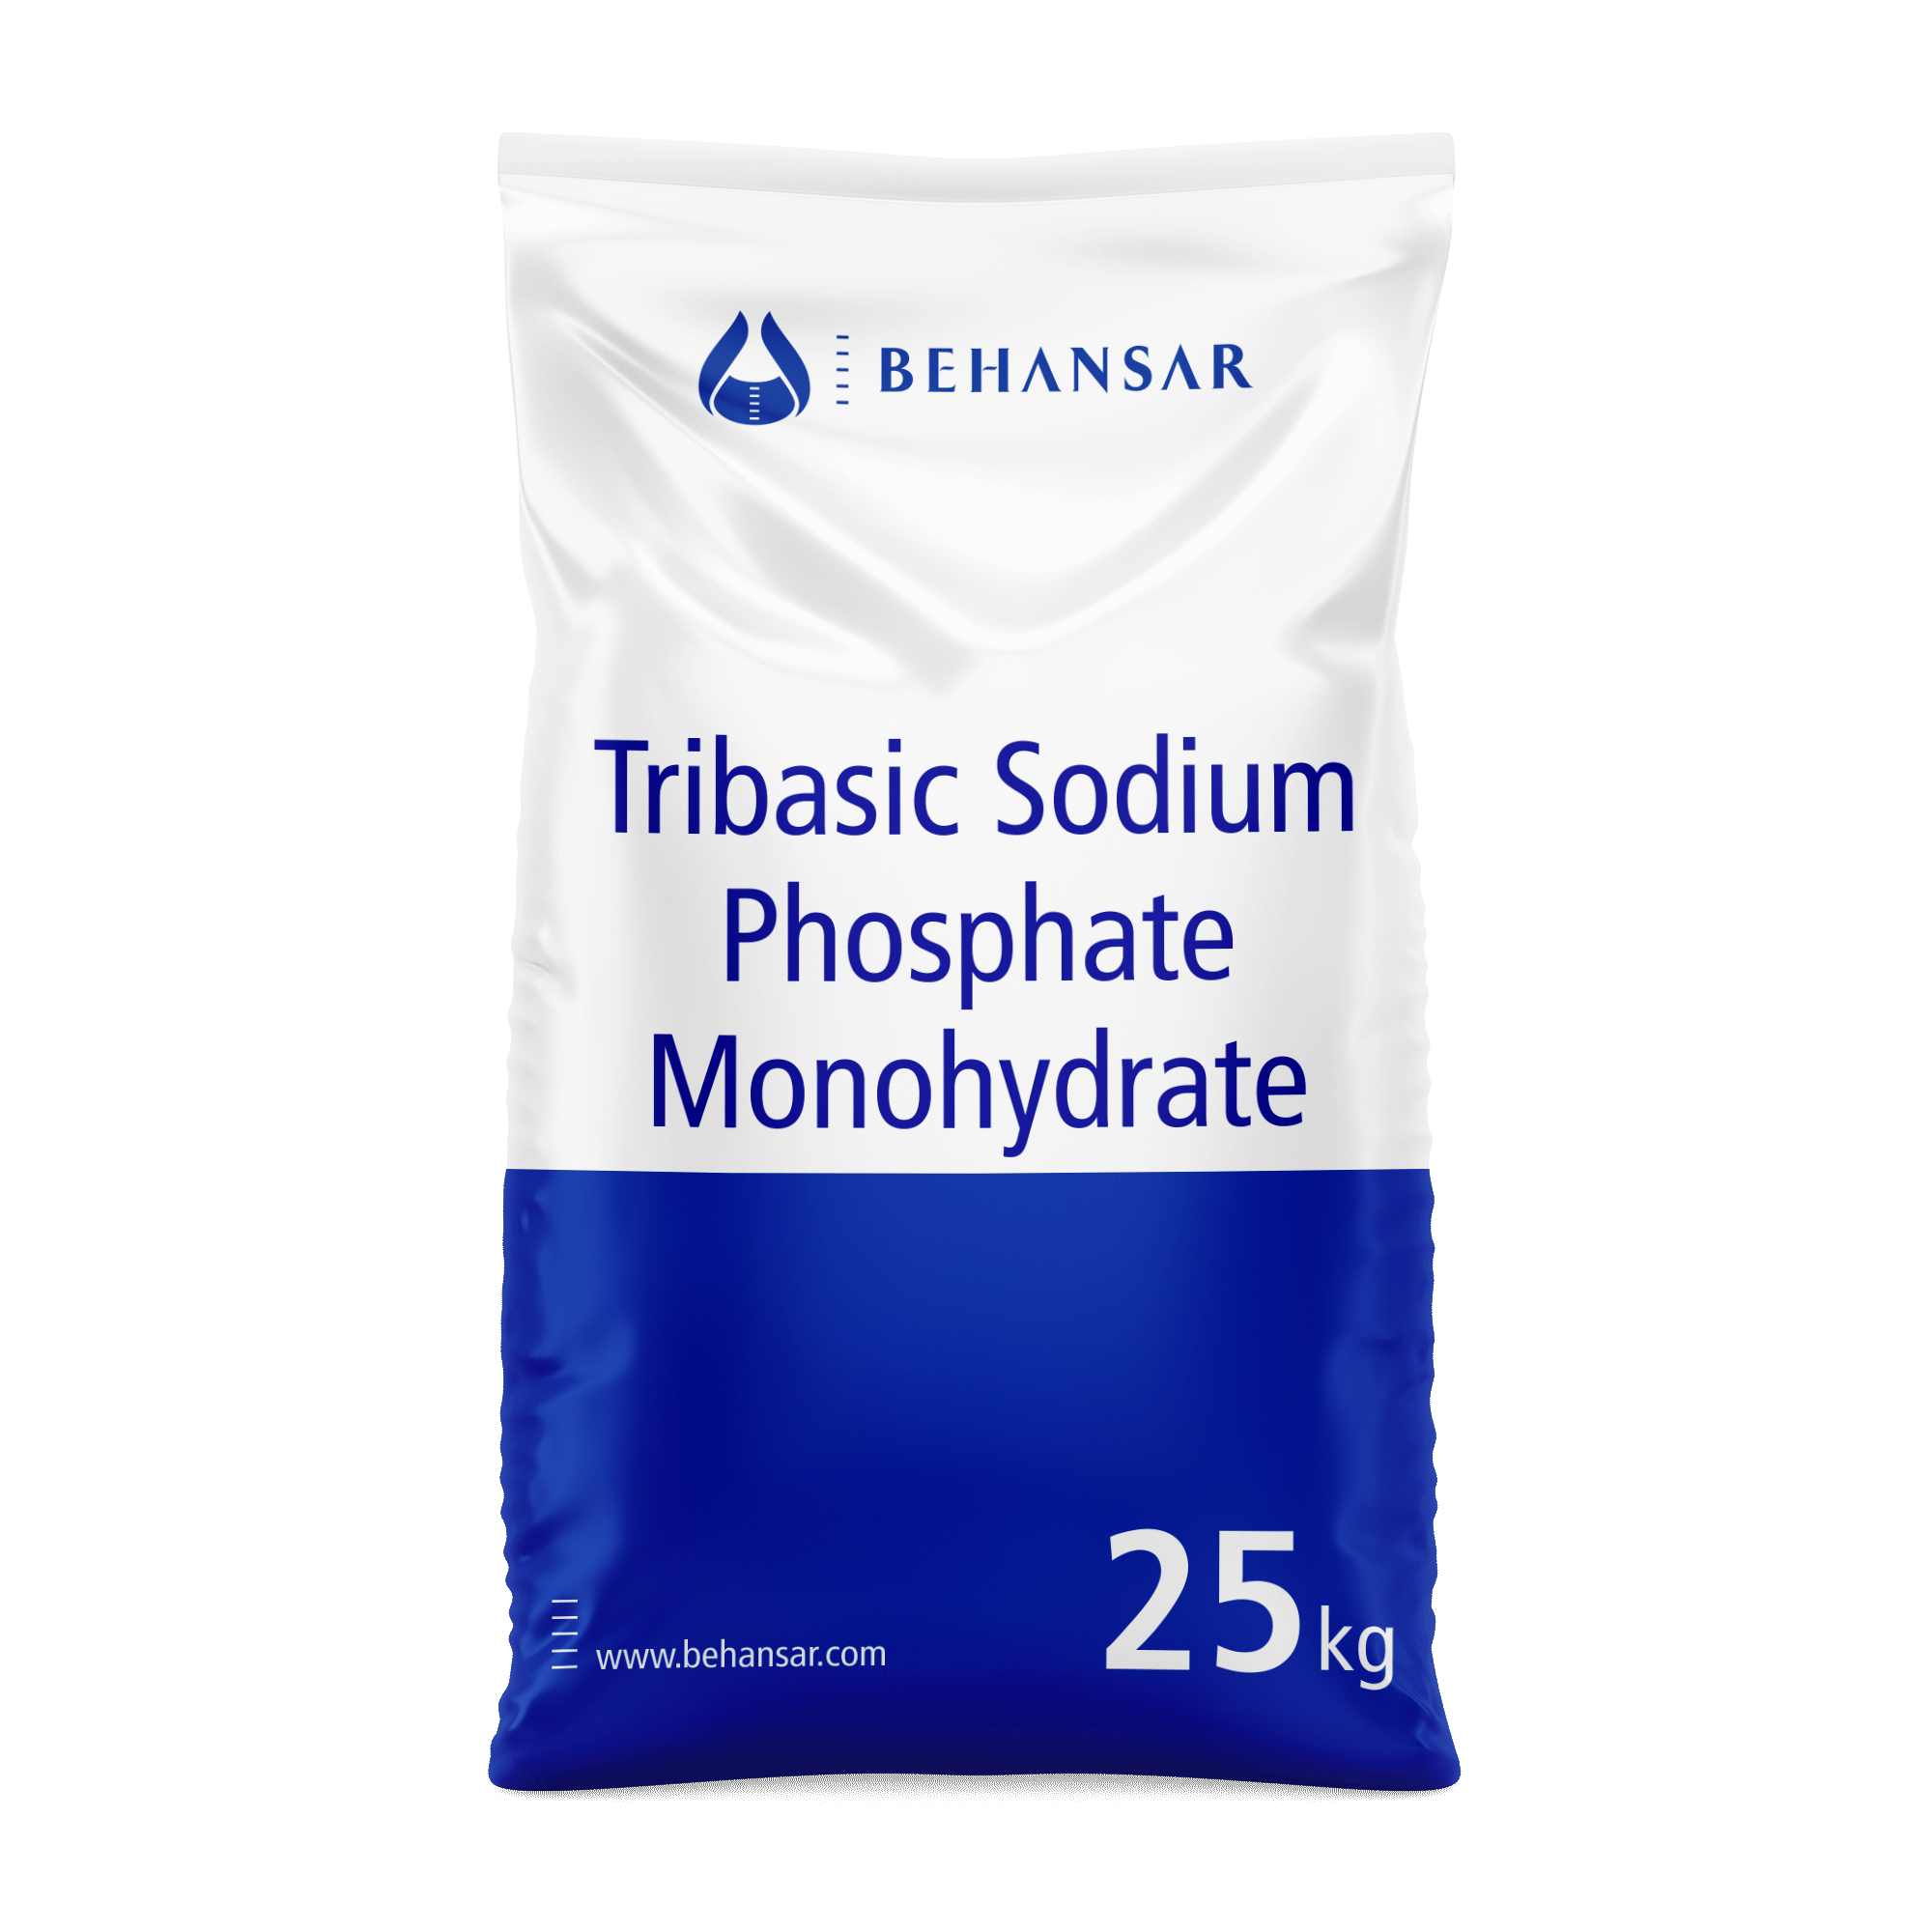 Tribasic Sodium Phosphate Monohydrate is one of the products of Behansar Co